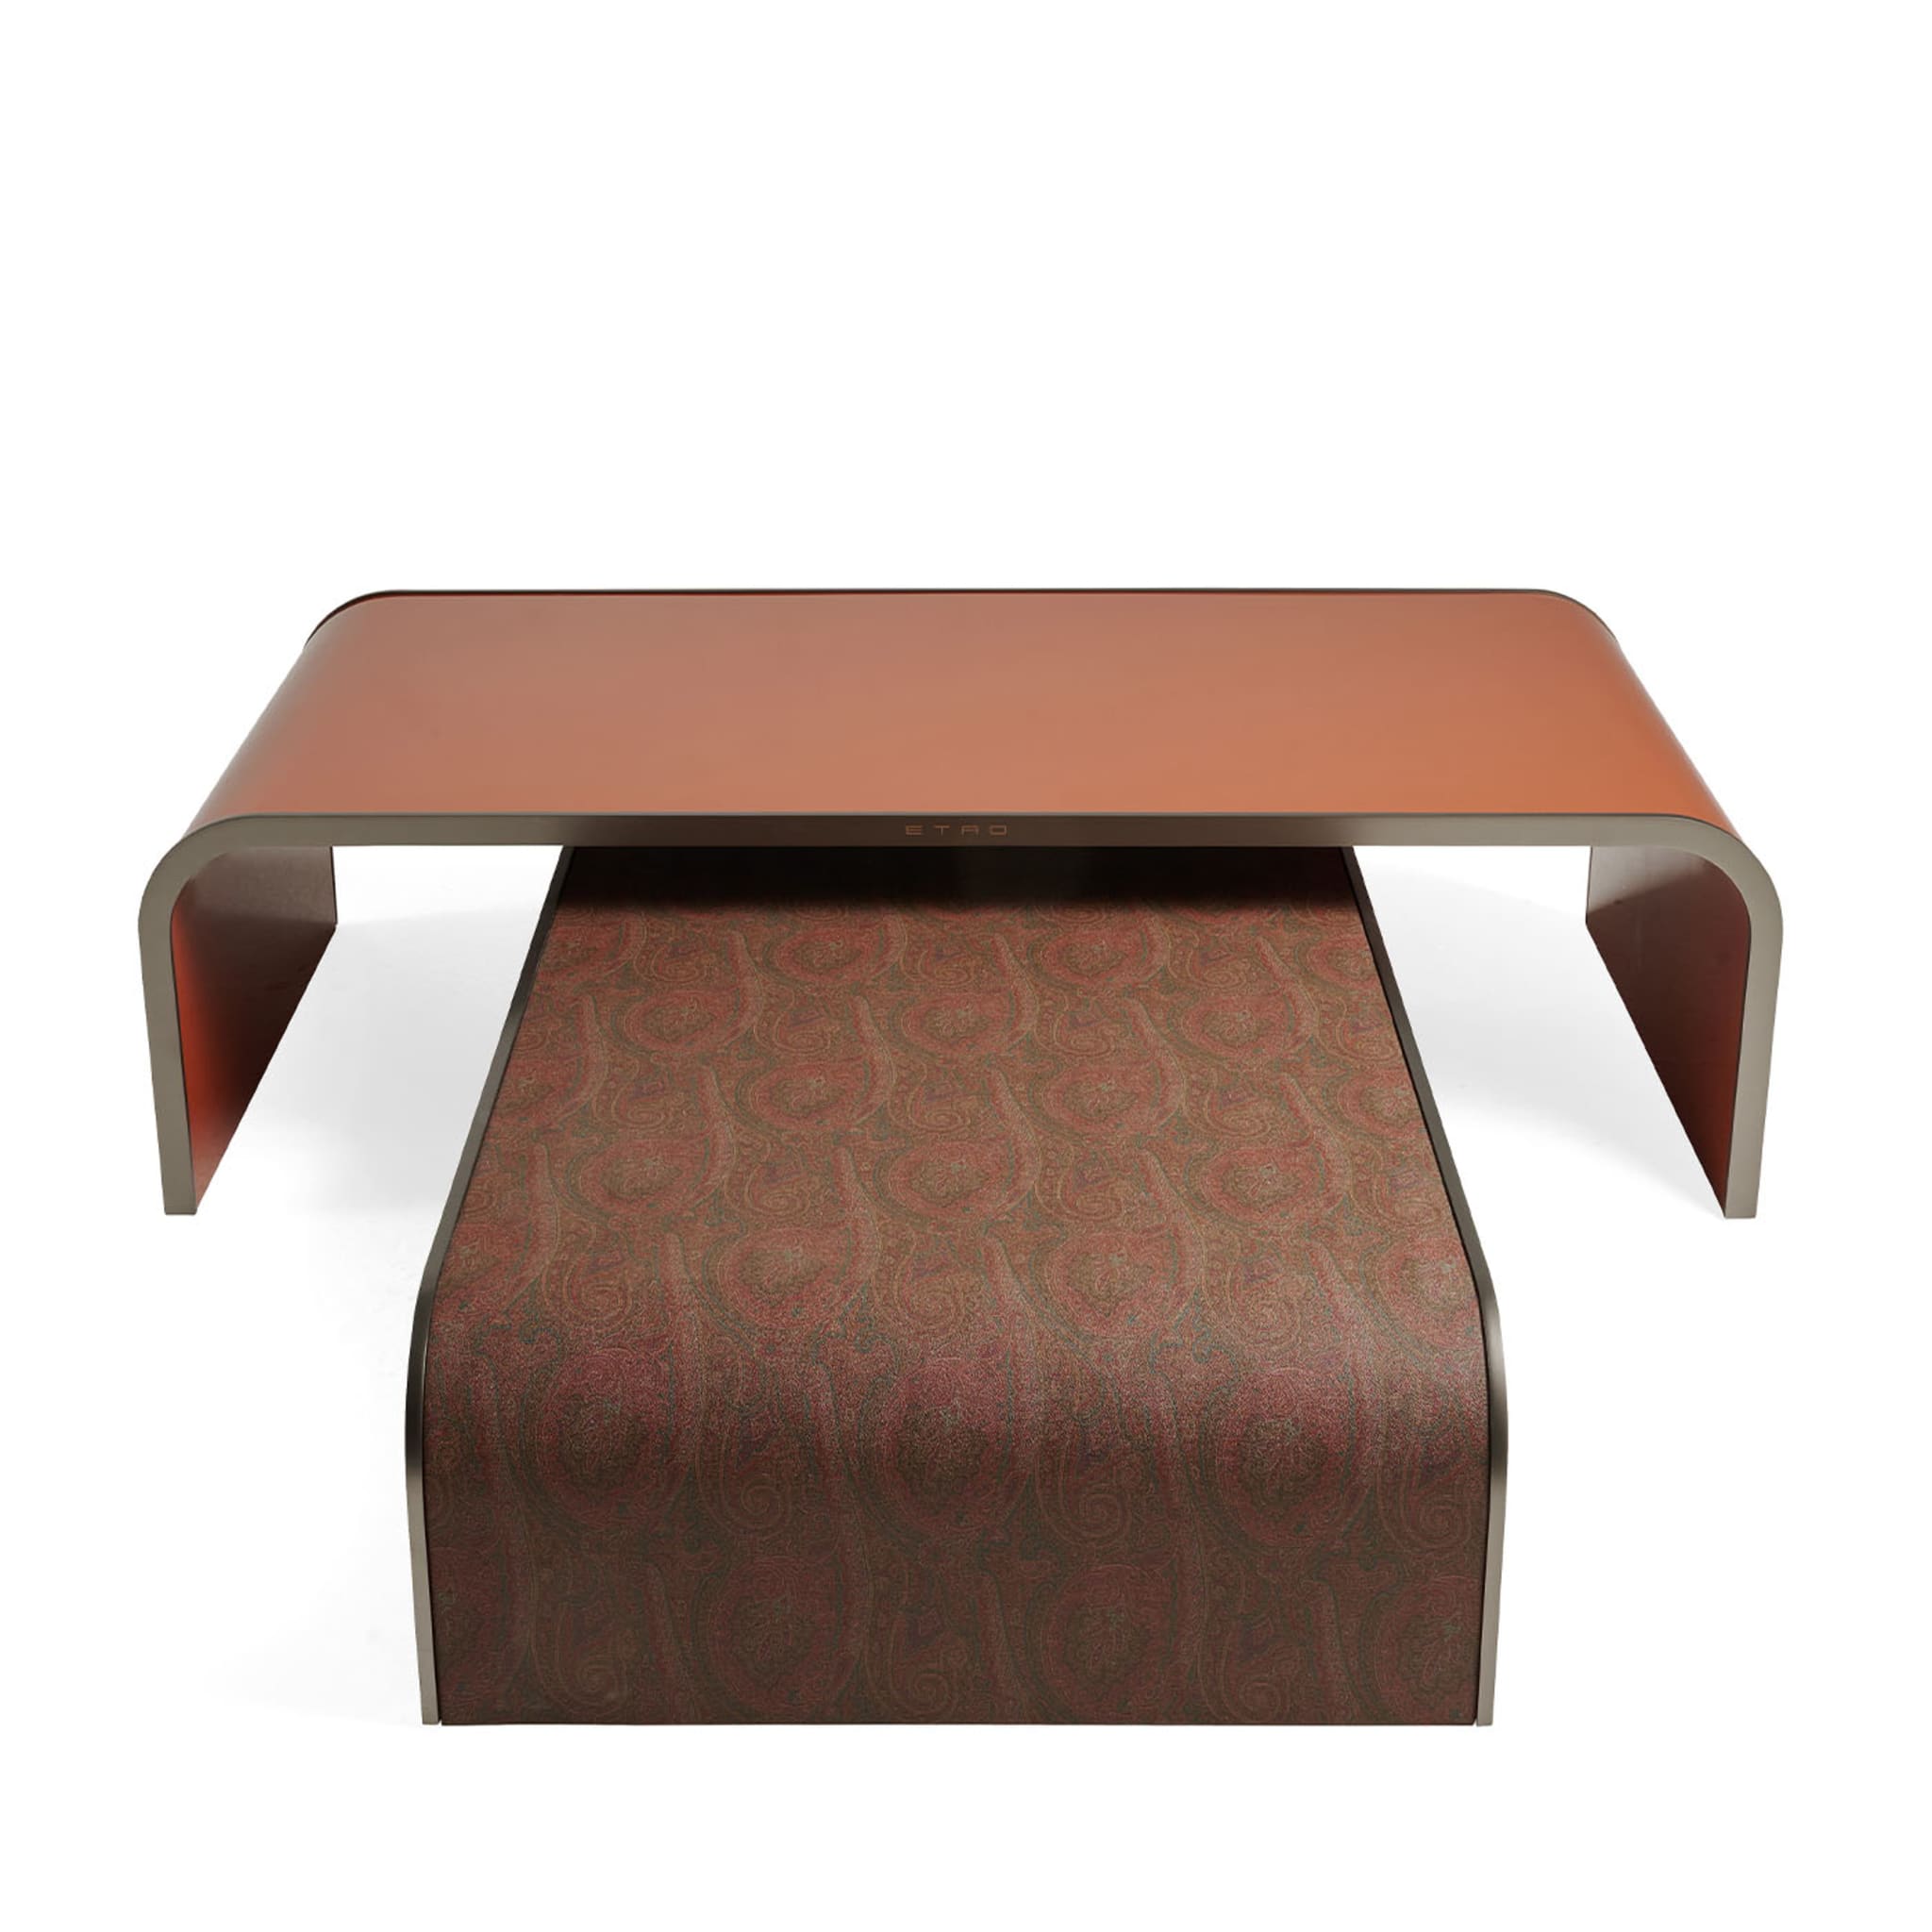 Set of 2 Fly Over Coffee Tables - Alternative view 3